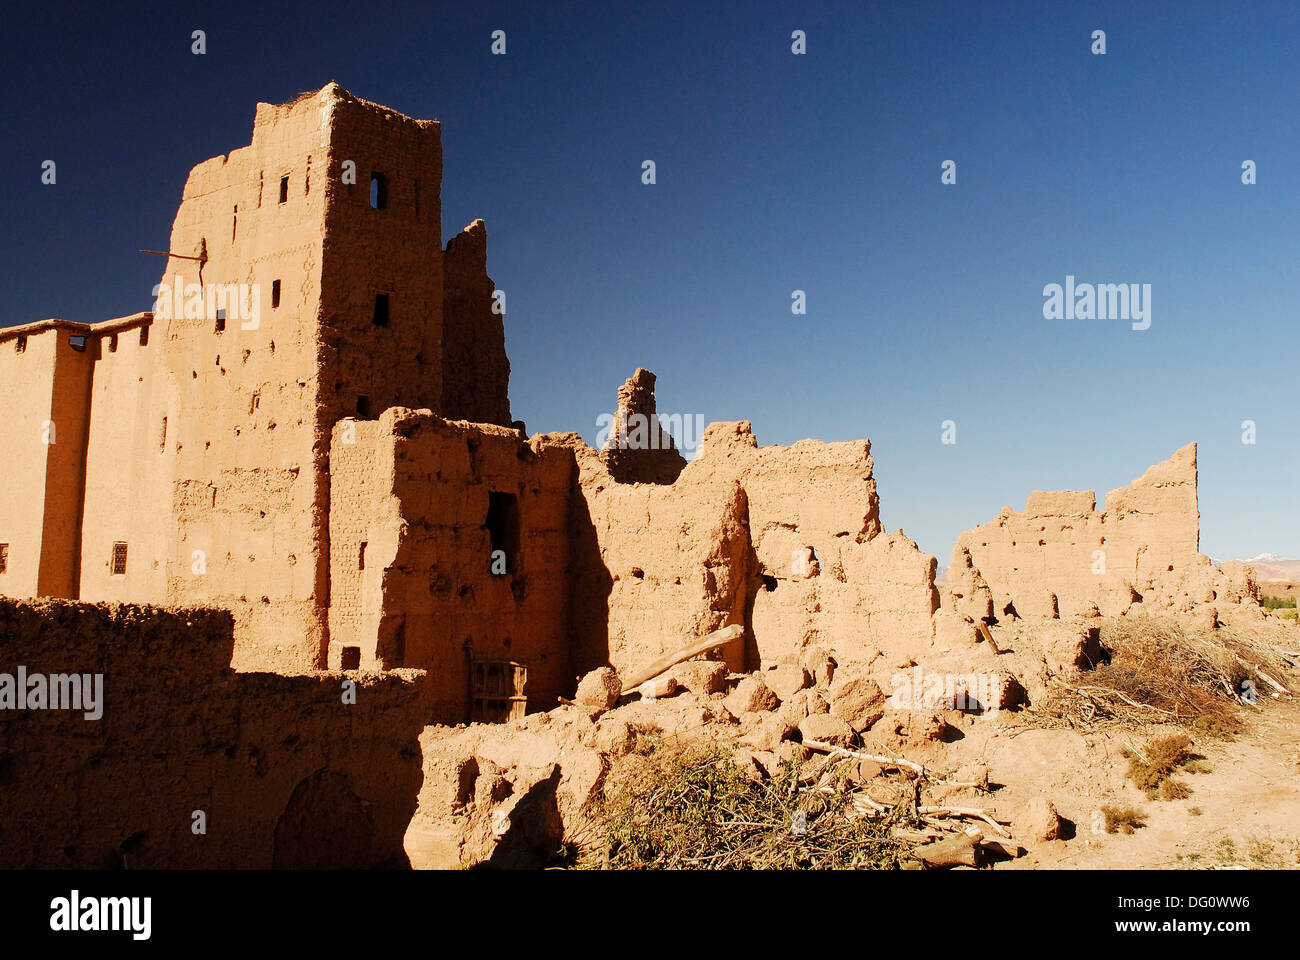 Kasbah of Talate in Dades valley, Morocco Stock Photo